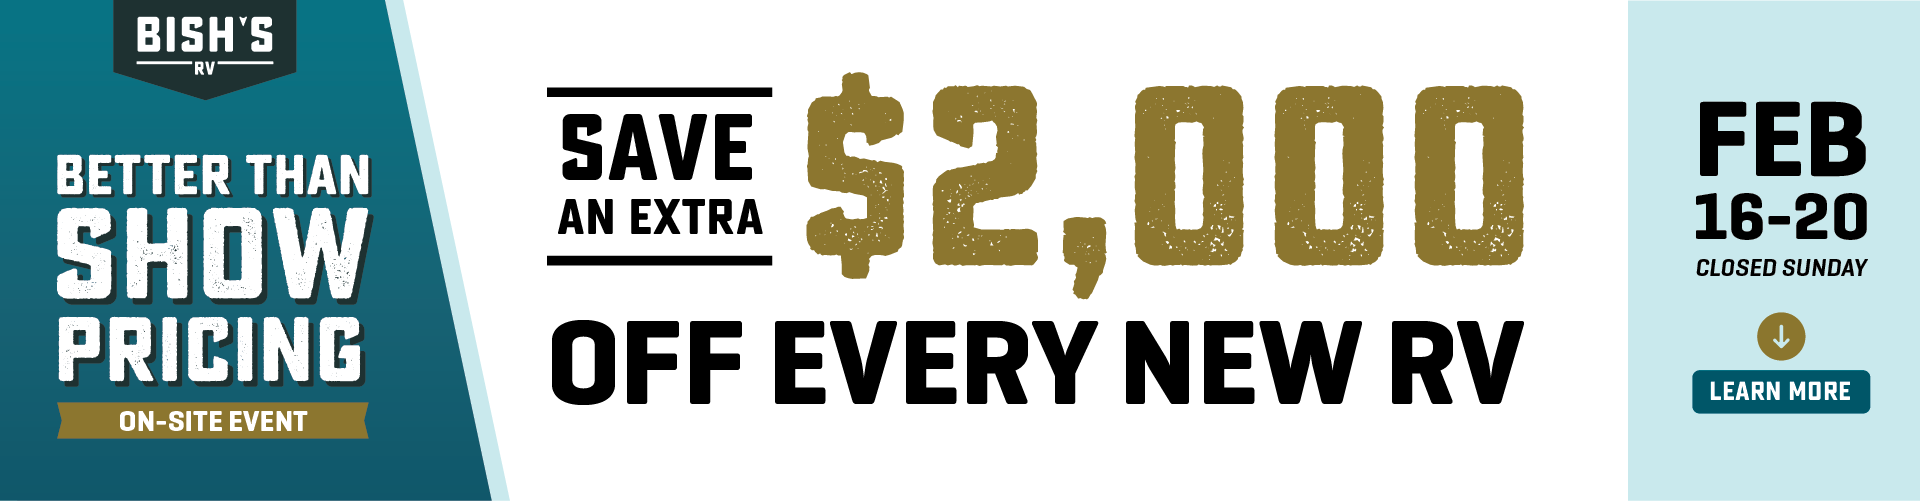 Better Than Show Pricing On-Site Event - save an extra $2,000 off every new RV